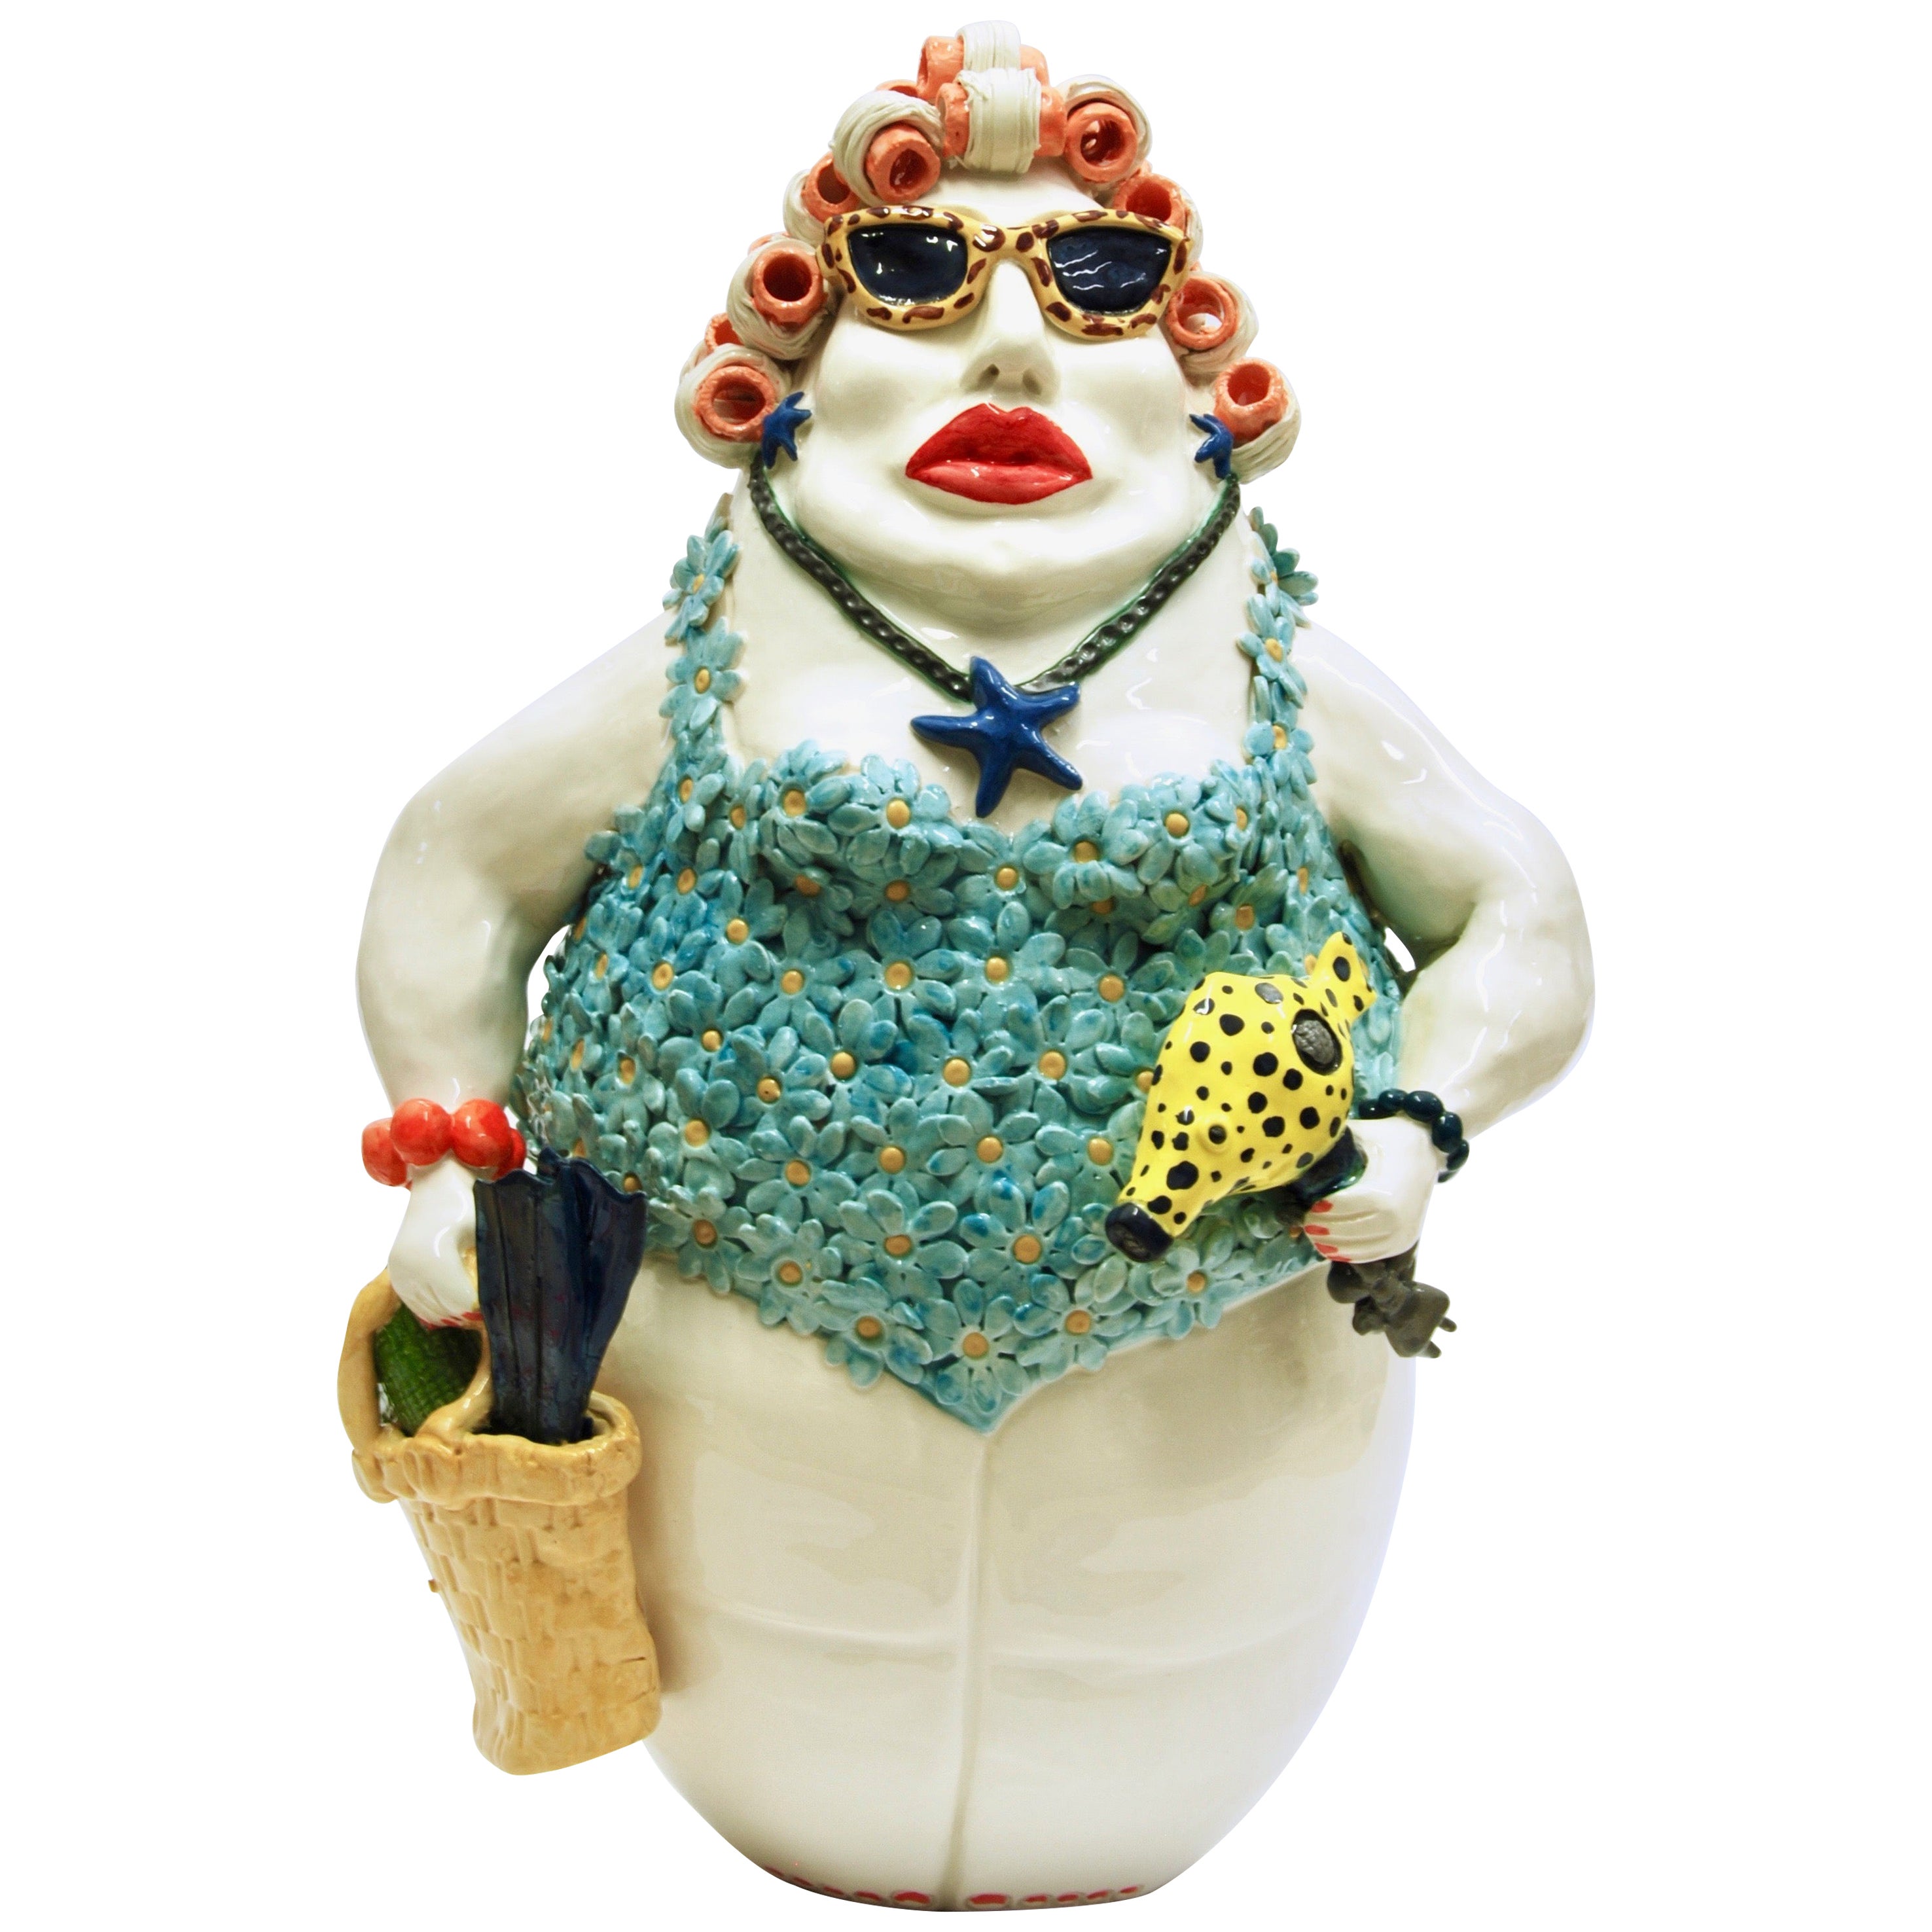 Curlers Sunbath Lady, Decorative Centerpiece Handmade Italy 2020, Hand-Crafted For Sale